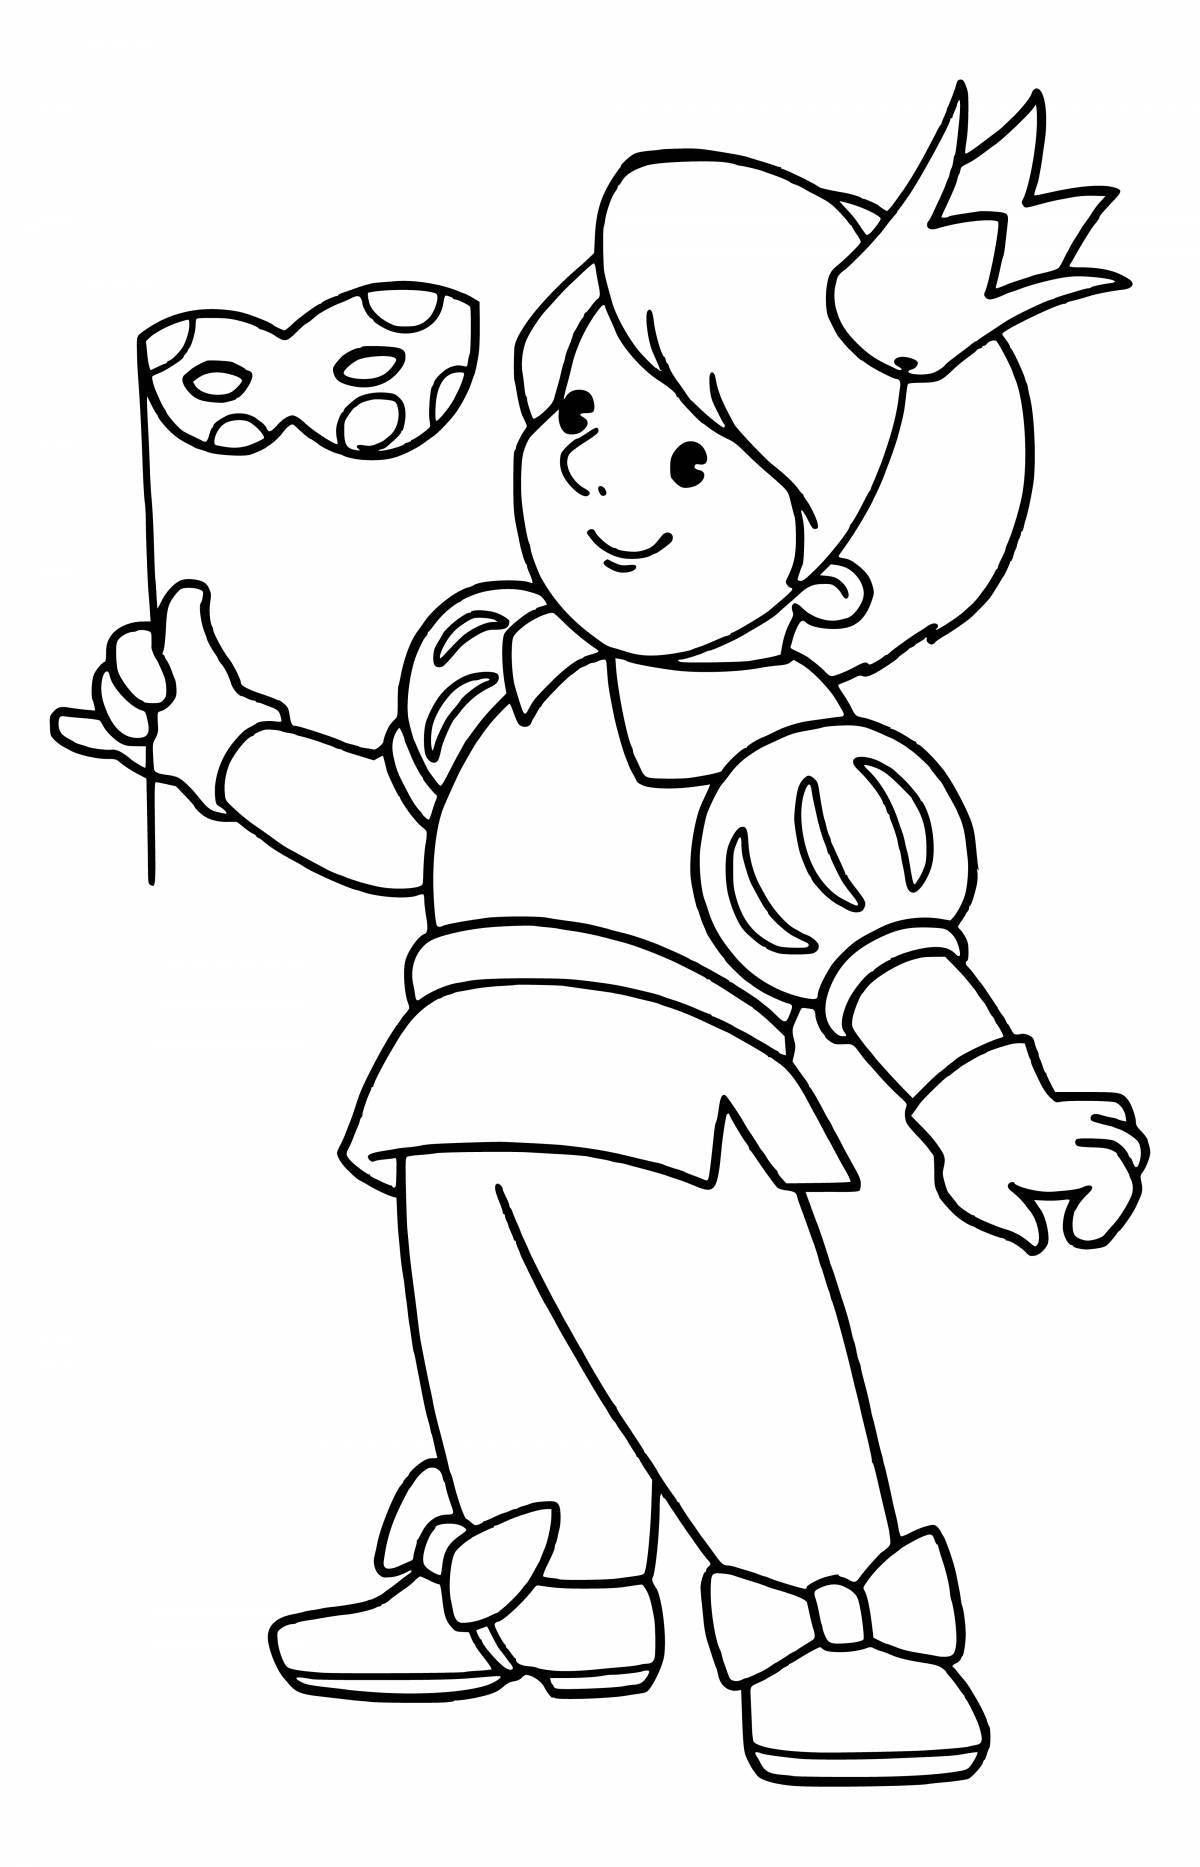 Coloring page funny carnival costume